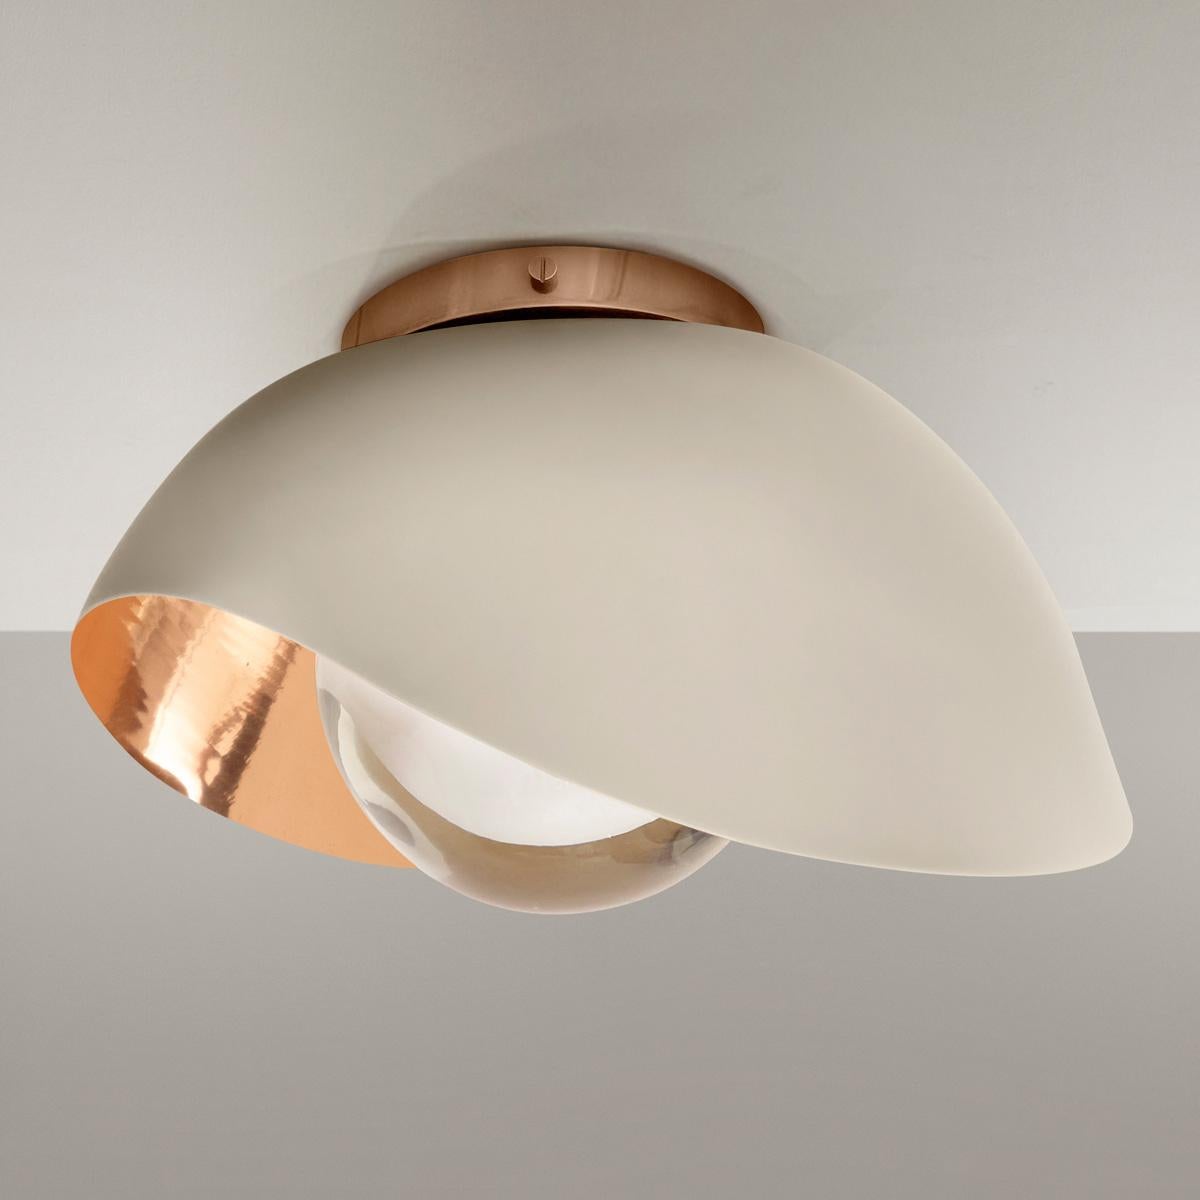 Contemporary Perla Flushmount Ceiling Light by Gaspare Asaro-Satin Brass/Polished Nickel For Sale